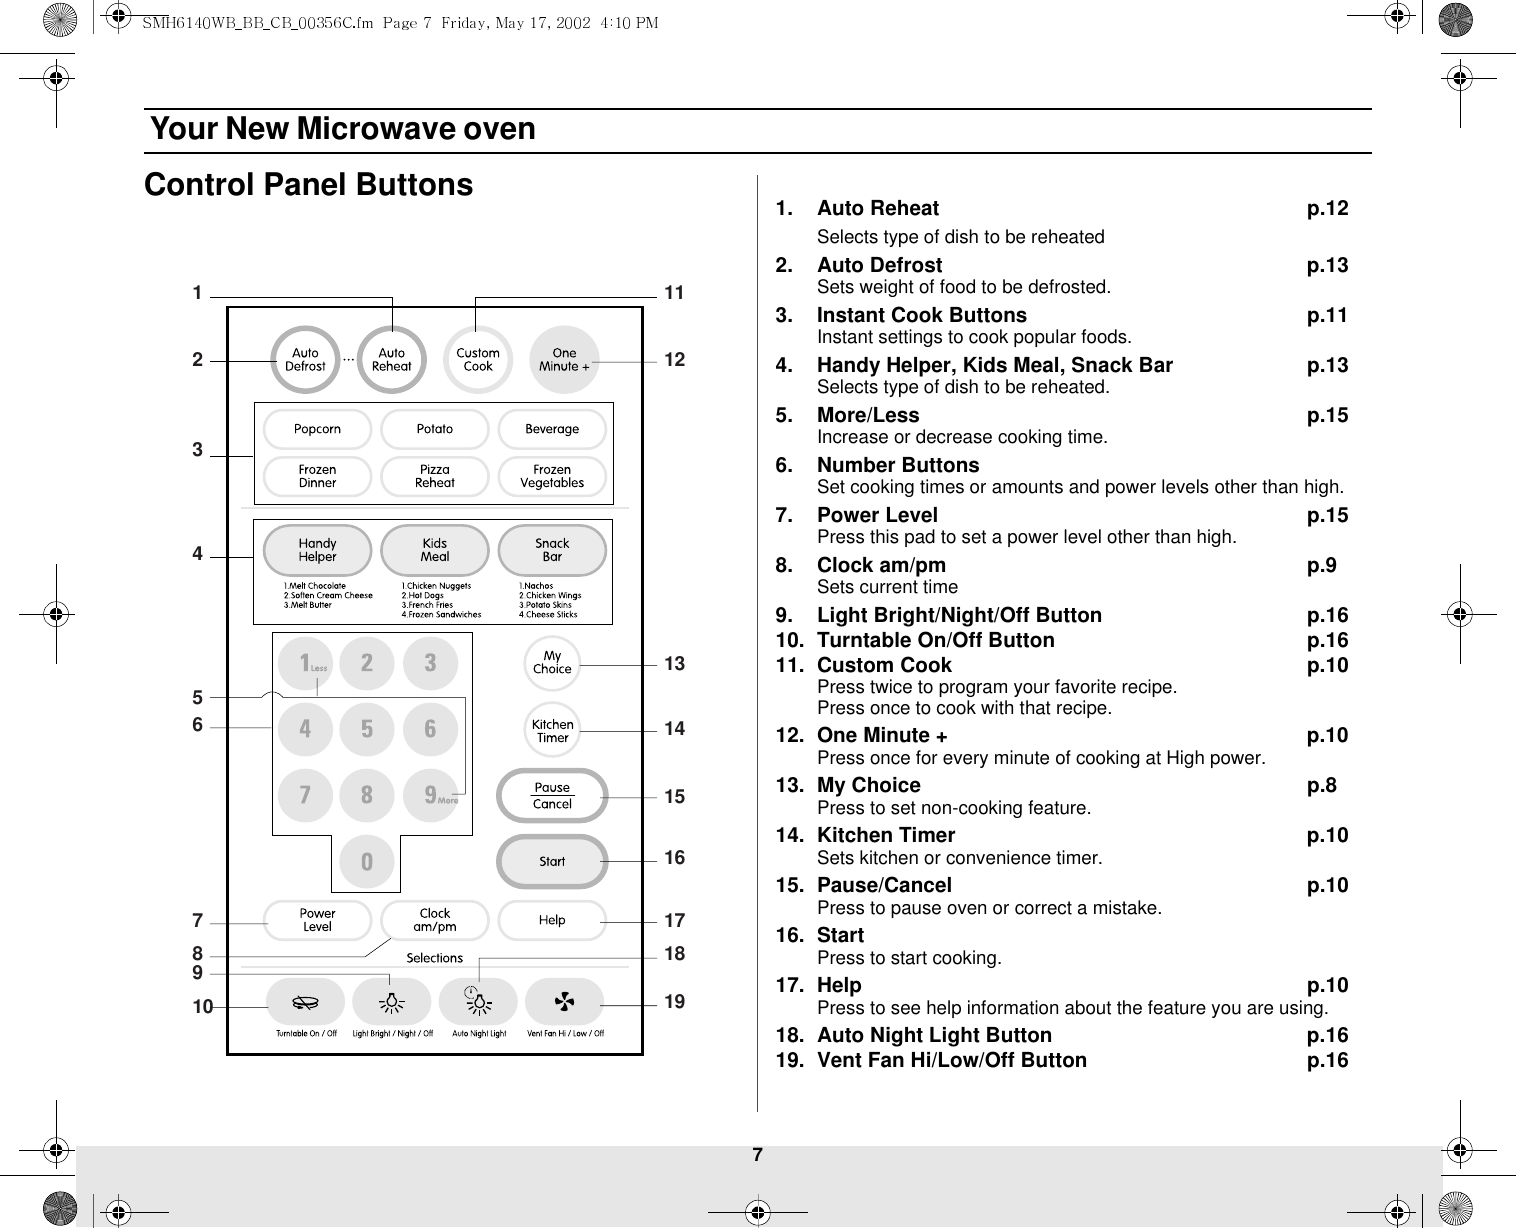 7 Your New Microwave ovenControl Panel Buttons 1. Auto Reheat p.12Selects type of dish to be reheated2. Auto Defrost p.13Sets weight of food to be defrosted.3. Instant Cook Buttons p.11Instant settings to cook popular foods.4. Handy Helper, Kids Meal, Snack Bar p.13Selects type of dish to be reheated.5. More/Less p.15Increase or decrease cooking time.6. Number ButtonsSet cooking times or amounts and power levels other than high.7. Power Level p.15Press this pad to set a power level other than high.8. Clock am/pm p.9Sets current time9. Light Bright/Night/Off Button p.1610. Turntable On/Off Button p.1611. Custom Cook p.10Press twice to program your favorite recipe.                                  Press once to cook with that recipe.12. One Minute + p.10Press once for every minute of cooking at High power.13. My Choice p.8Press to set non-cooking feature.14. Kitchen Timer p.10Sets kitchen or convenience timer.15. Pause/Cancel p.10Press to pause oven or correct a mistake.16. StartPress to start cooking.17. Help p.10Press to see help information about the feature you are using.18. Auto Night Light Button p.1619. Vent Fan Hi/Low/Off Button p.1612111213141516171819346578910